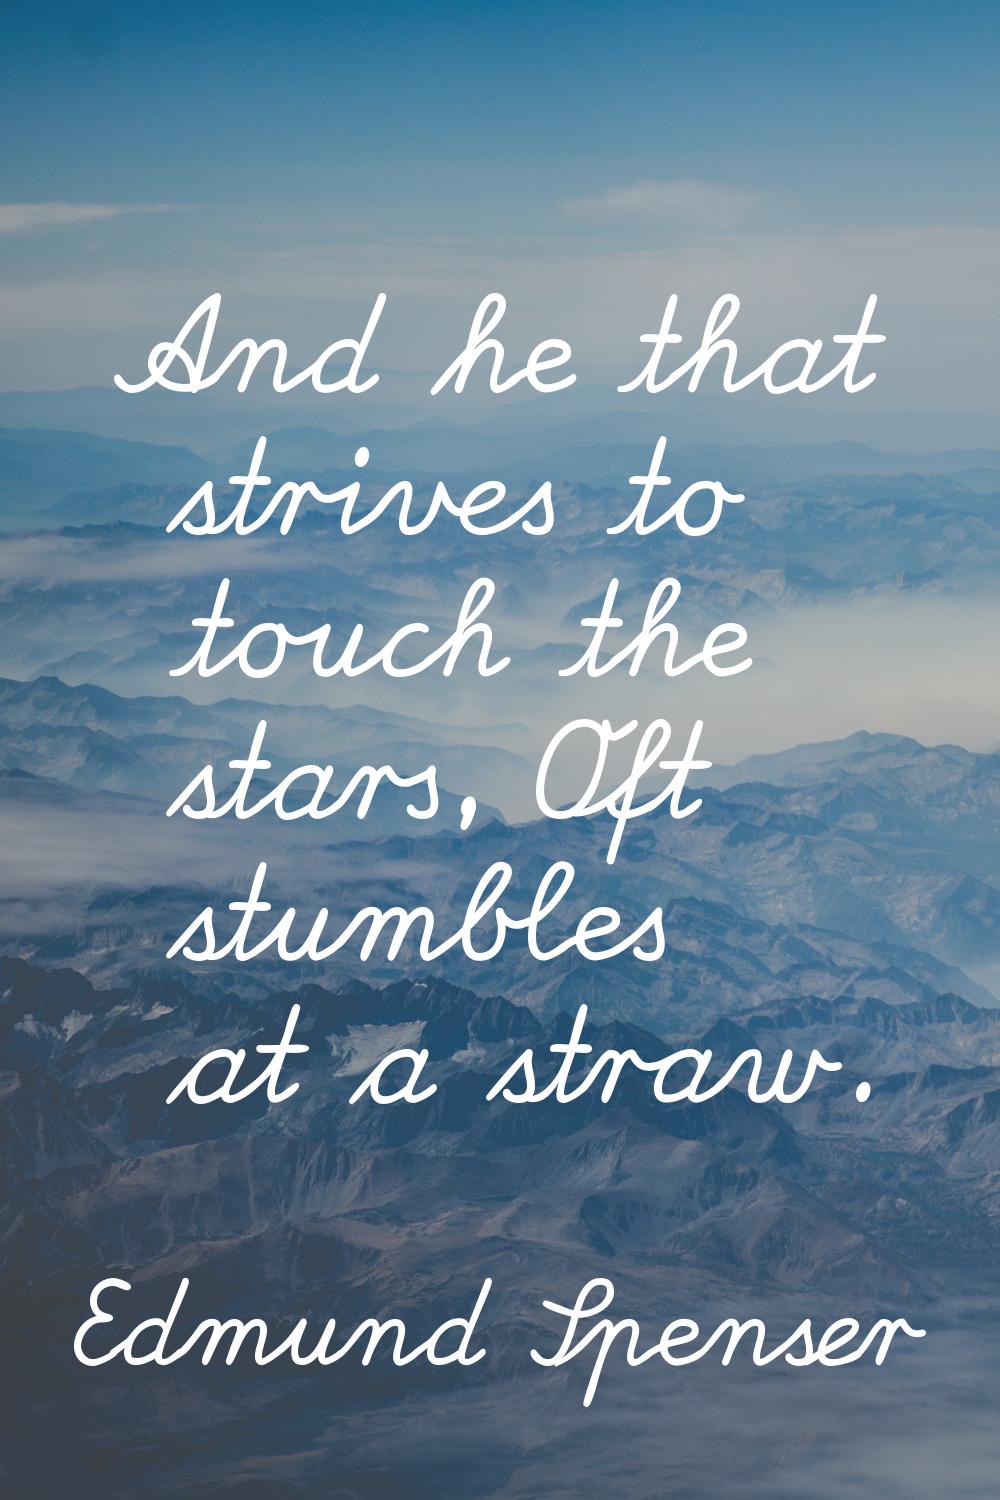 And he that strives to touch the stars, Oft stumbles at a straw.